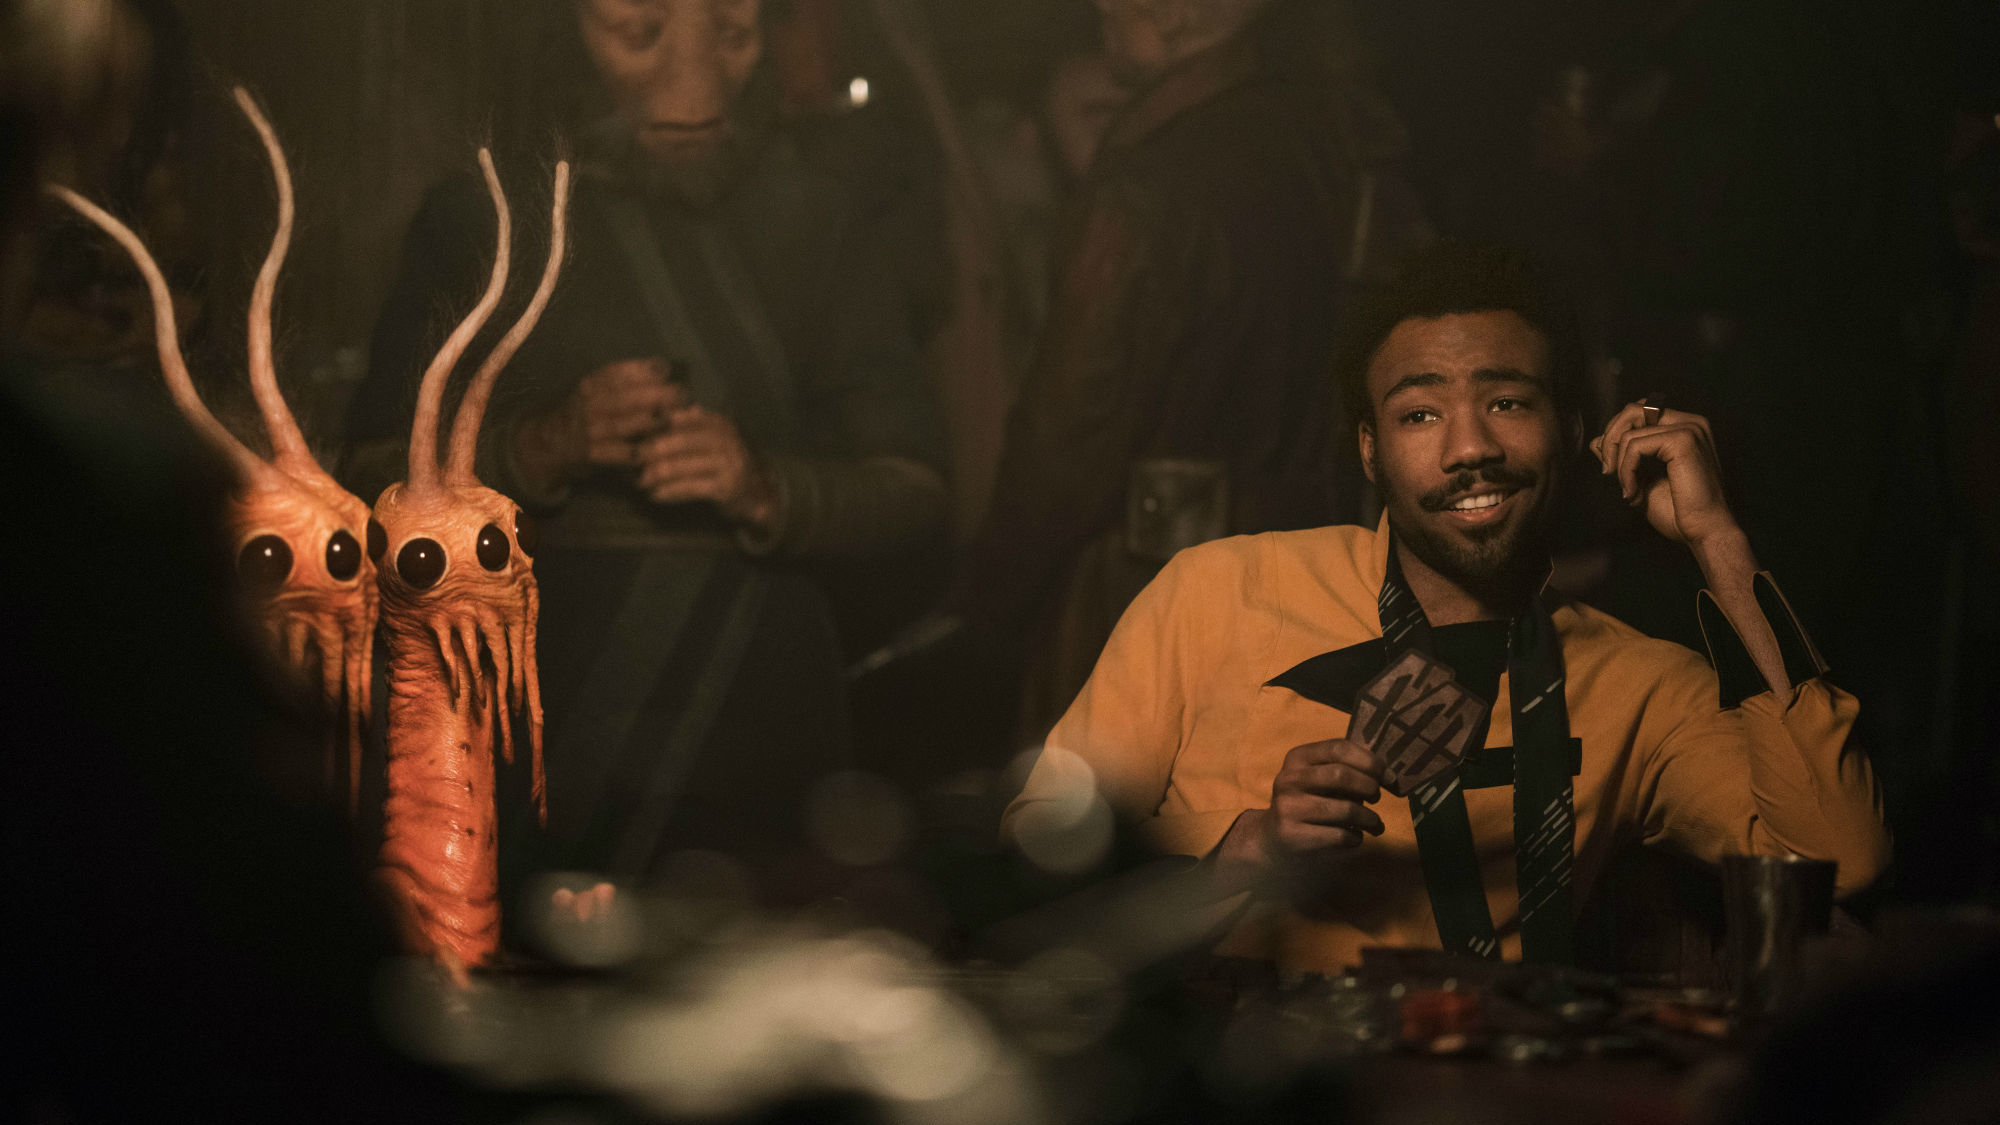 Here’s What Happens When Han Solo Plays To Win The Millennium Falcon From Lando